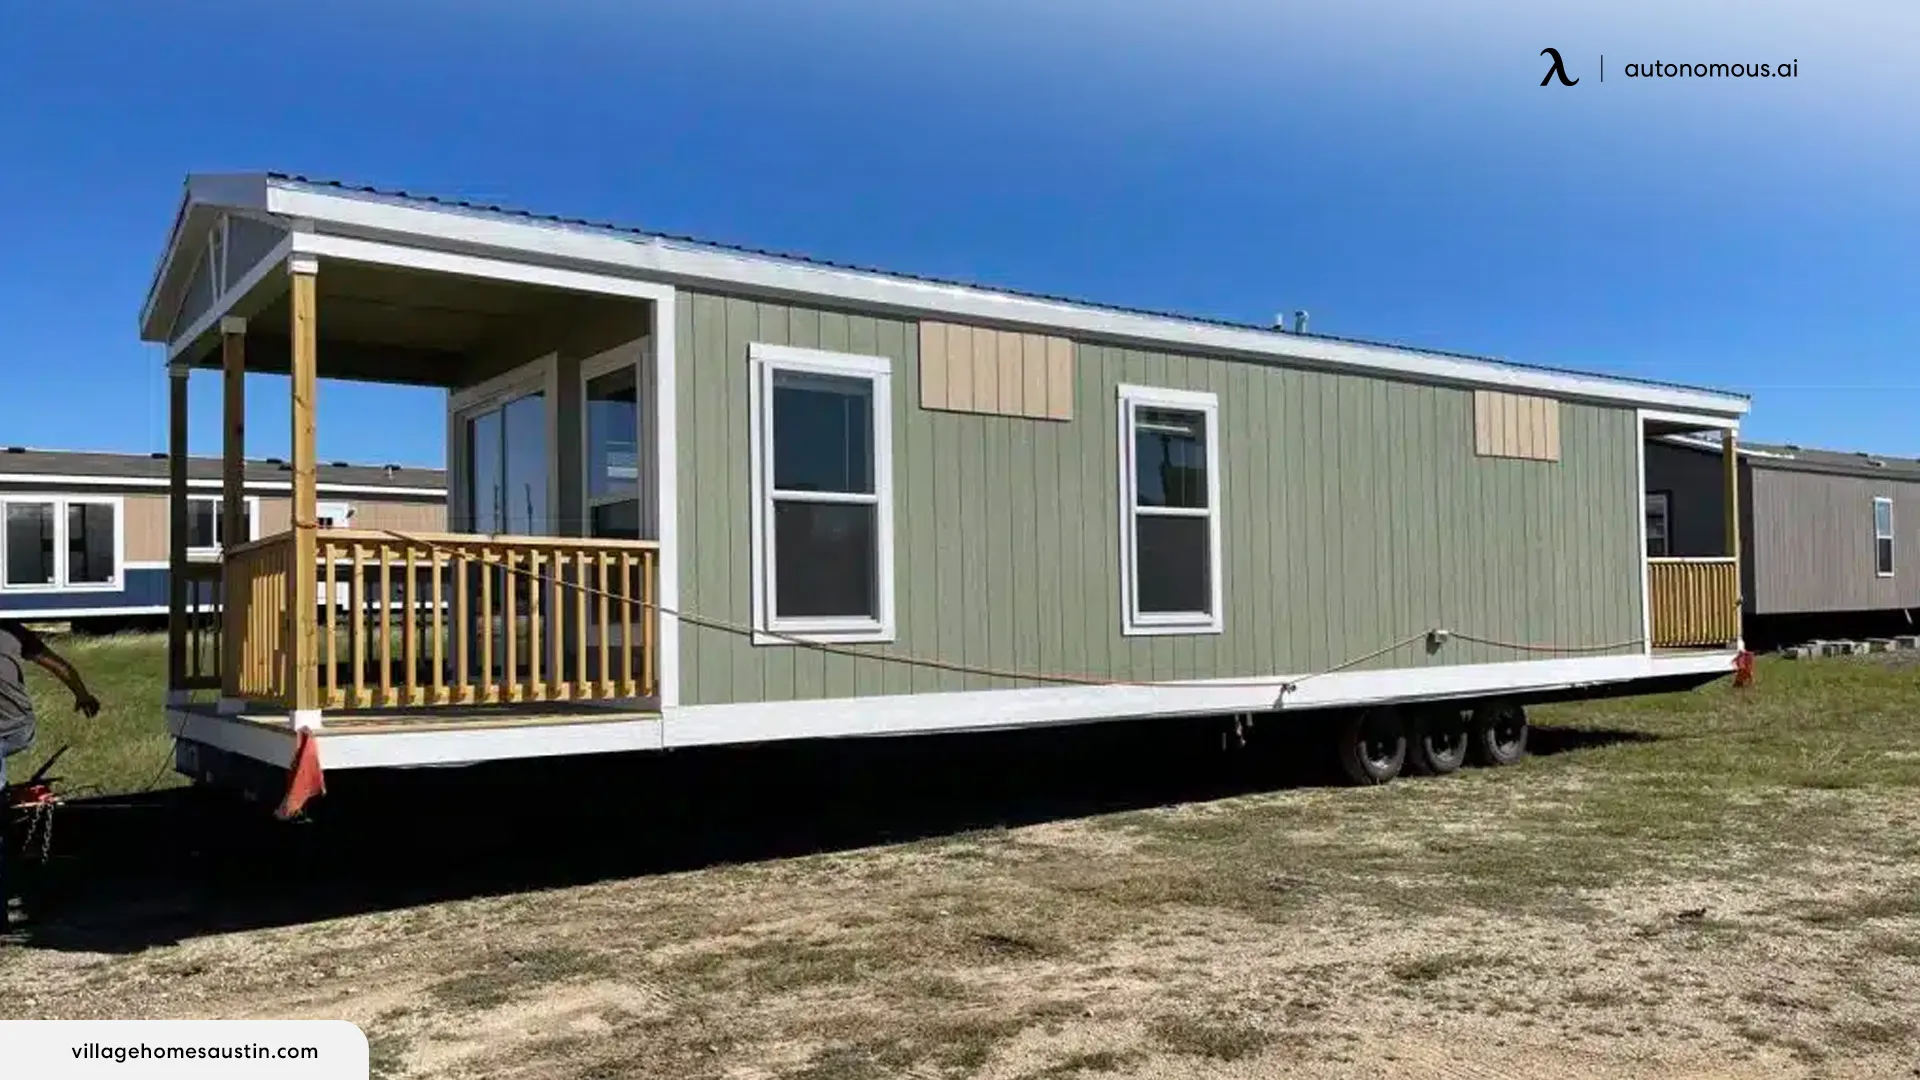 What to Consider When Choosing Park Model RV Homes?